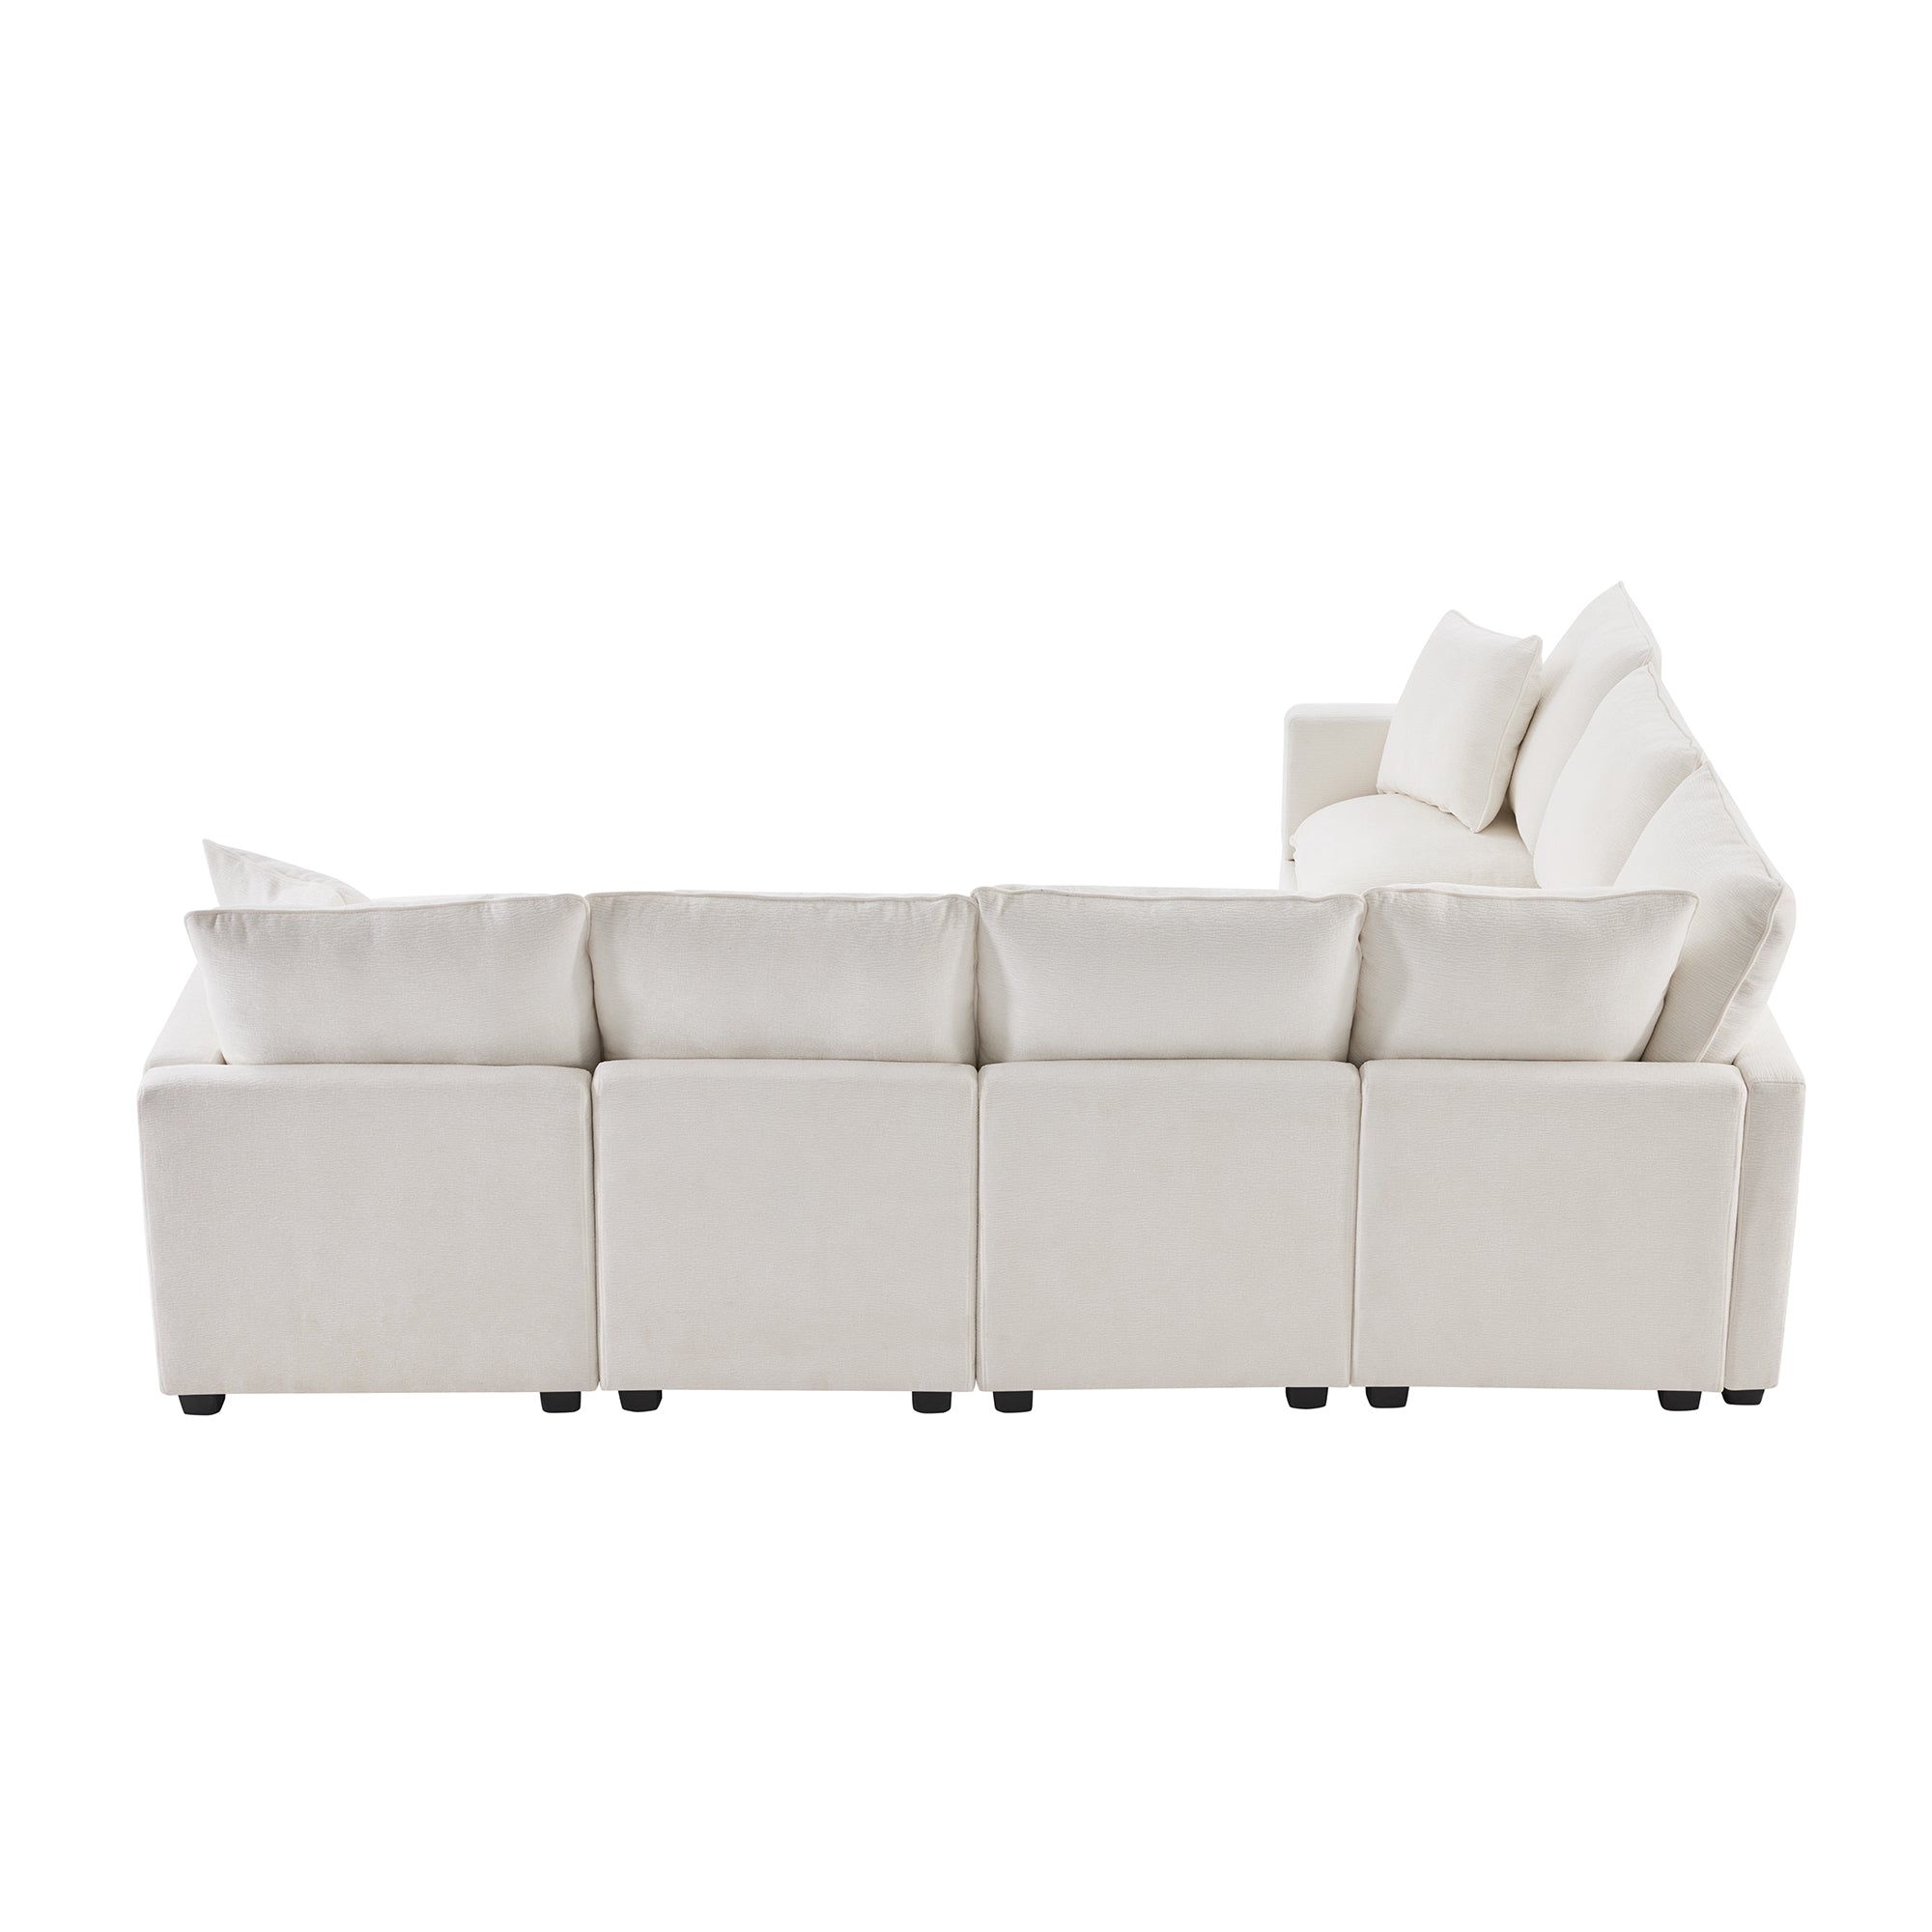 Bellemave® 110" U-Shape Modern Chenille Modular Sofa with 2 Pillows Included Bellemave®